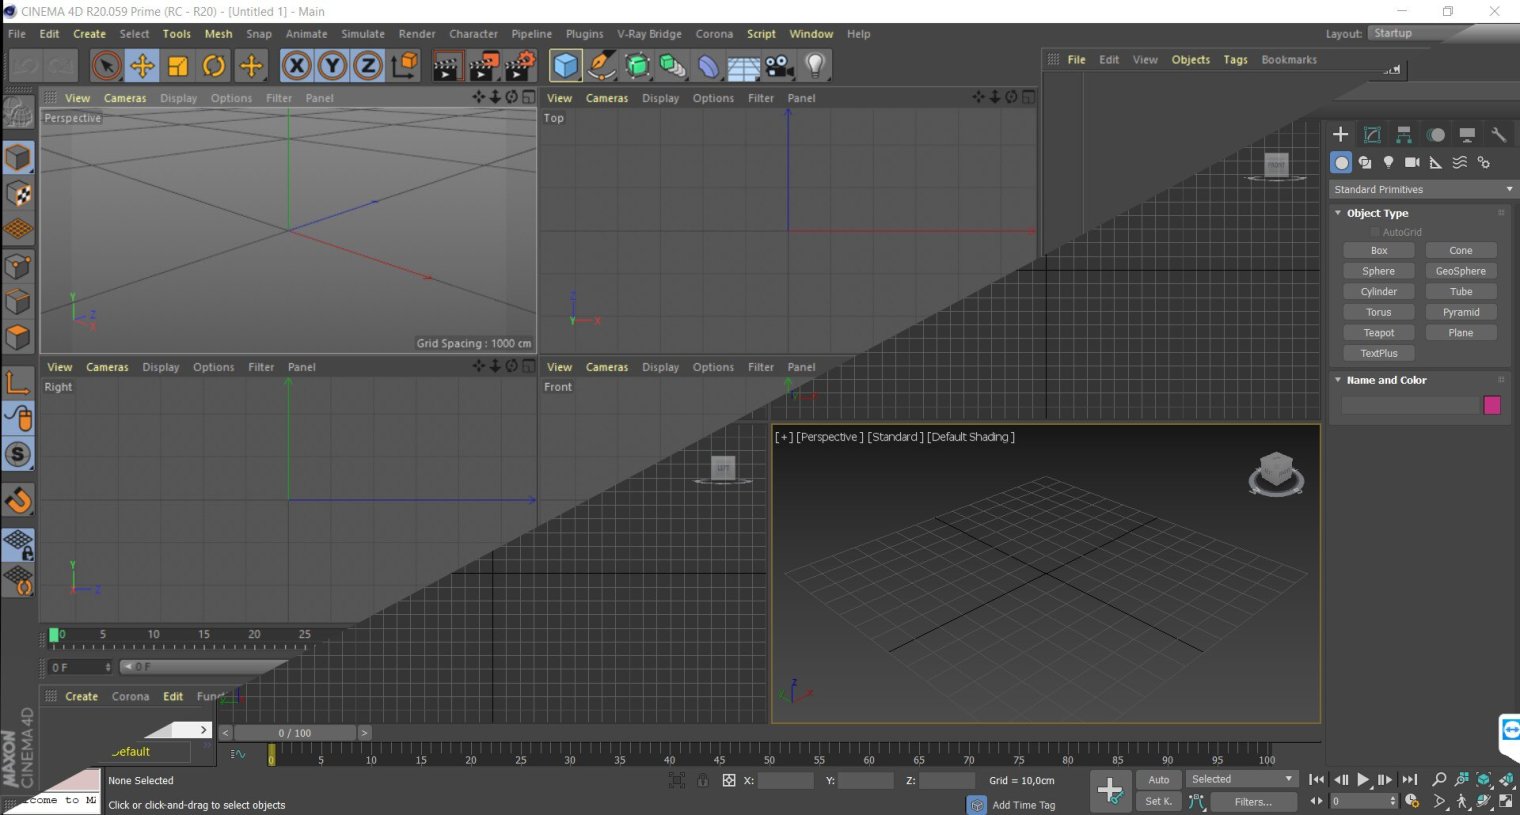 Migrating from 3ds Max’s to Cinema 4D’s user interface